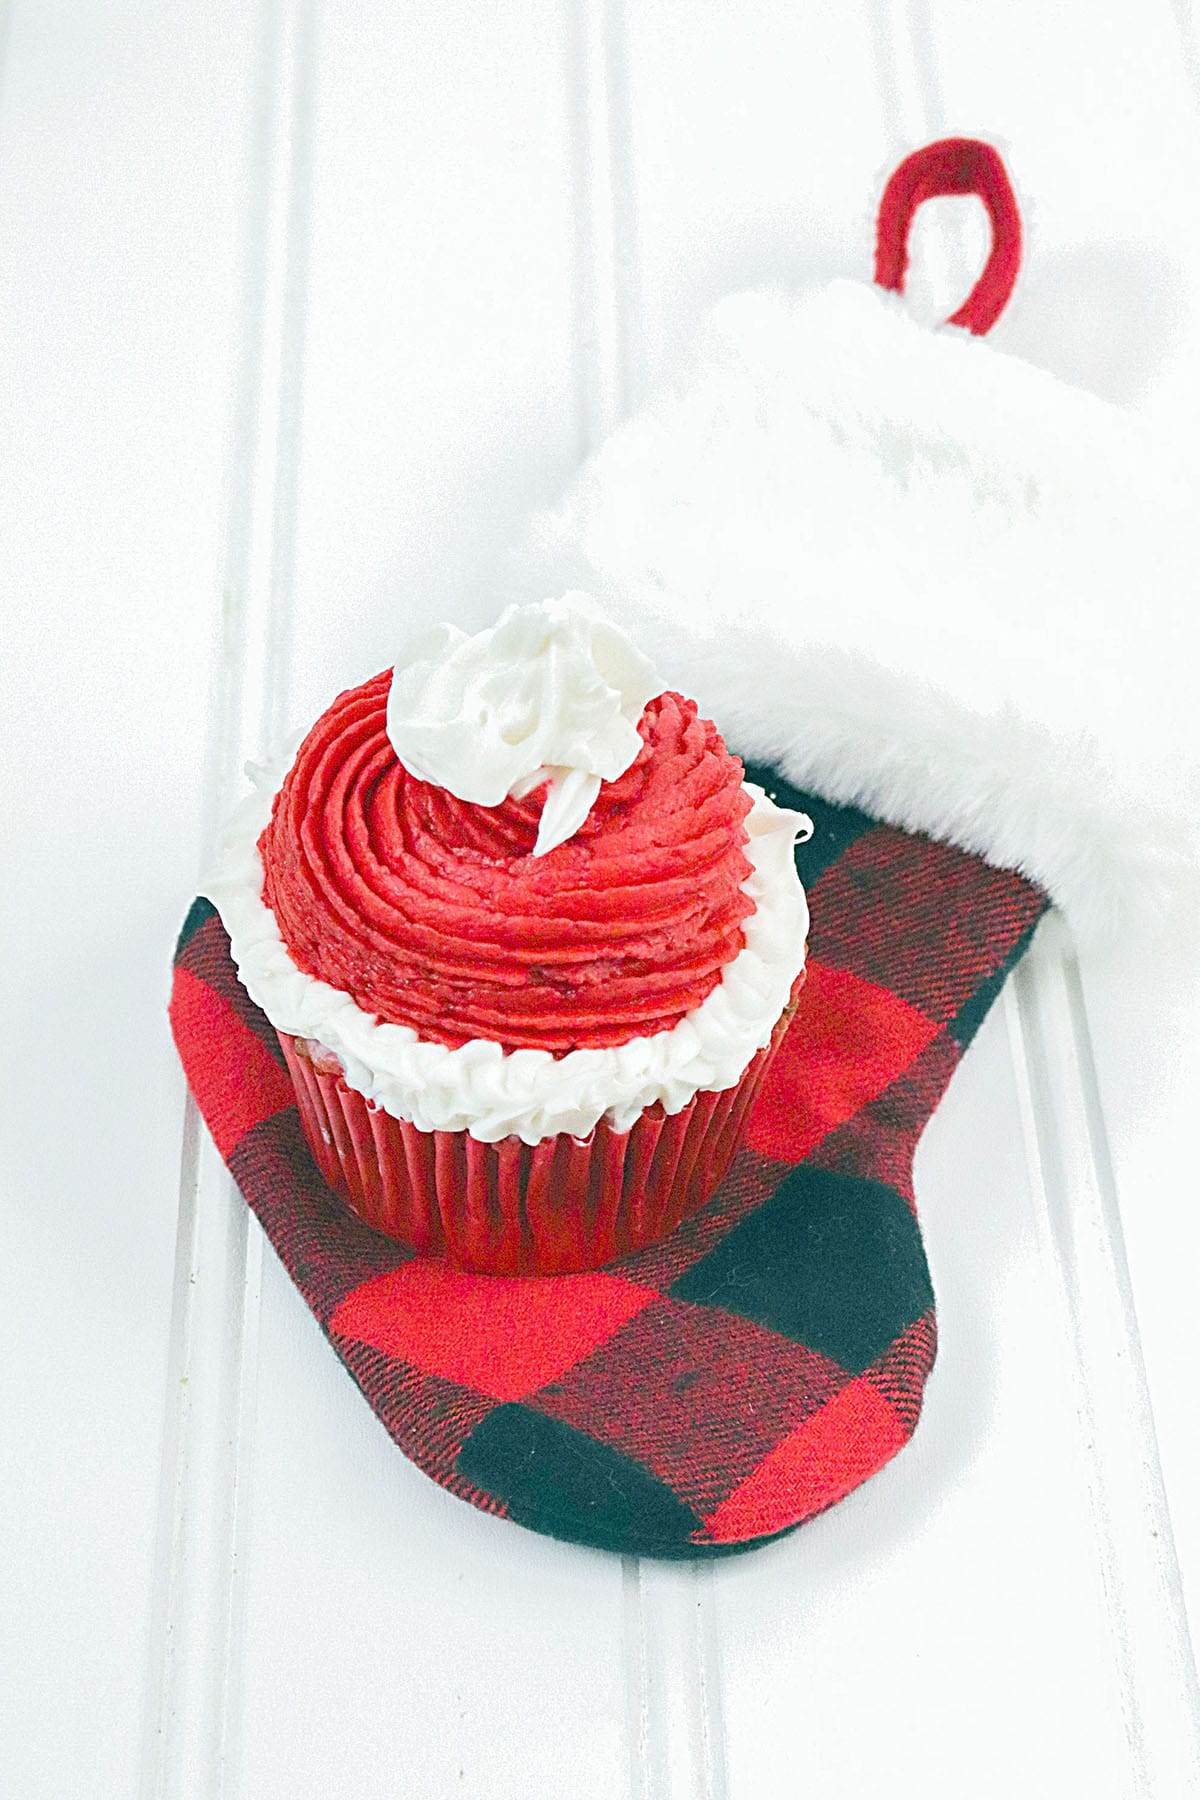 A santa's hat cupcake sitting on a red and white buffalo check stocking.